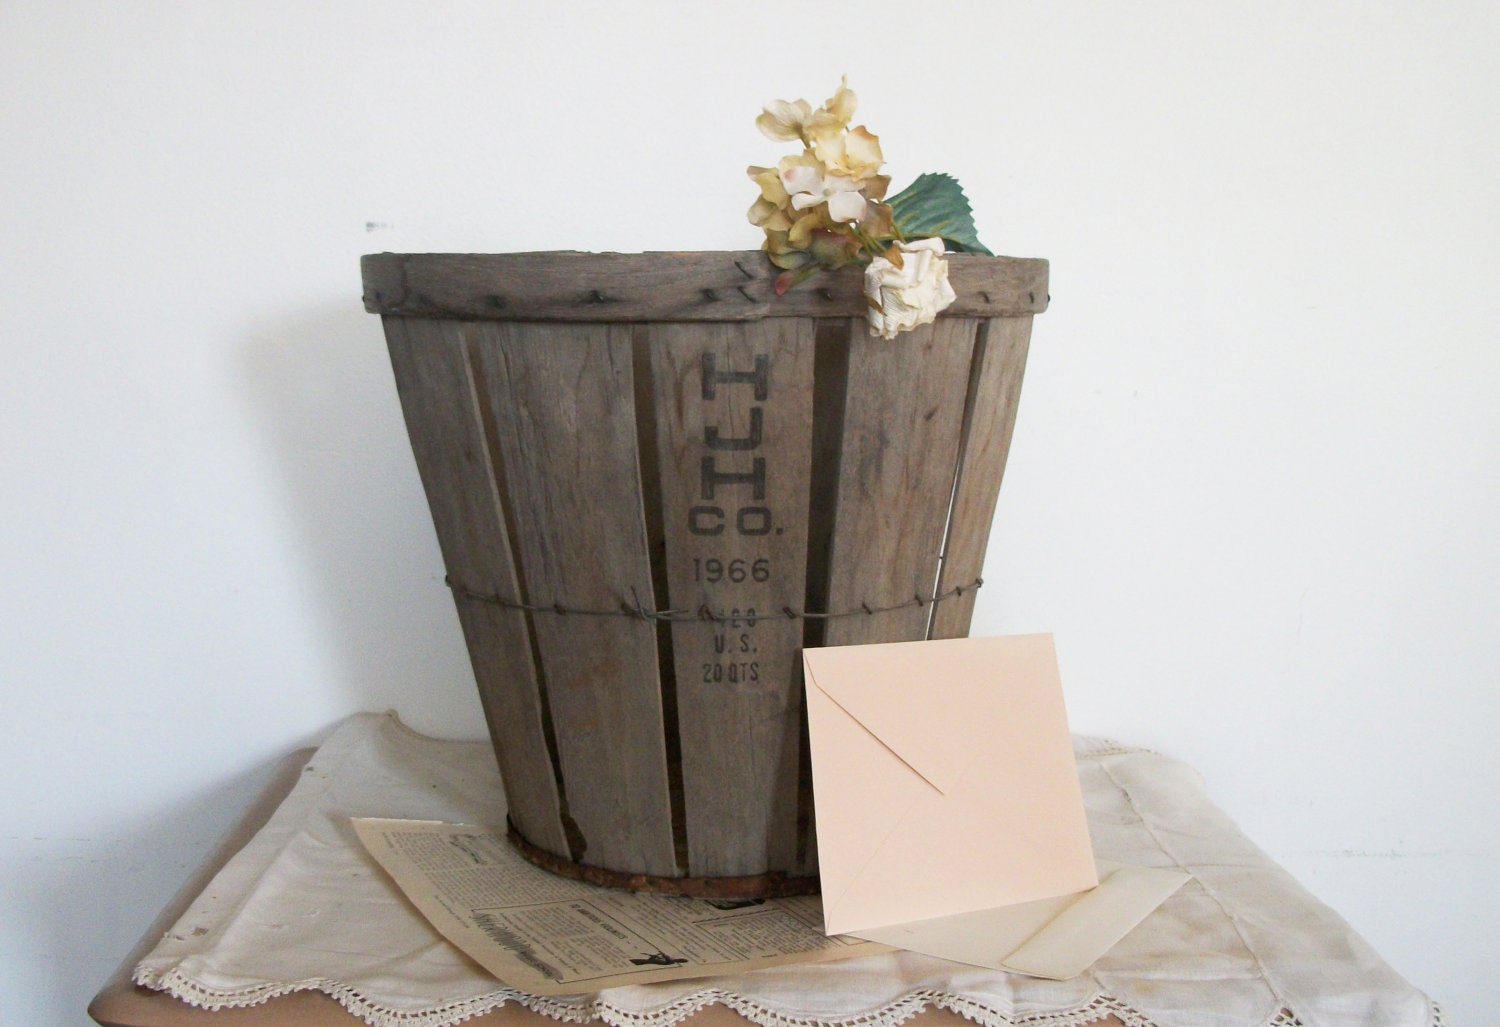 Vintage Orchard Basket- Card Basket For Rustic Outdoor Wedding / Party - HJH Co 1966 - TheeLetterQ